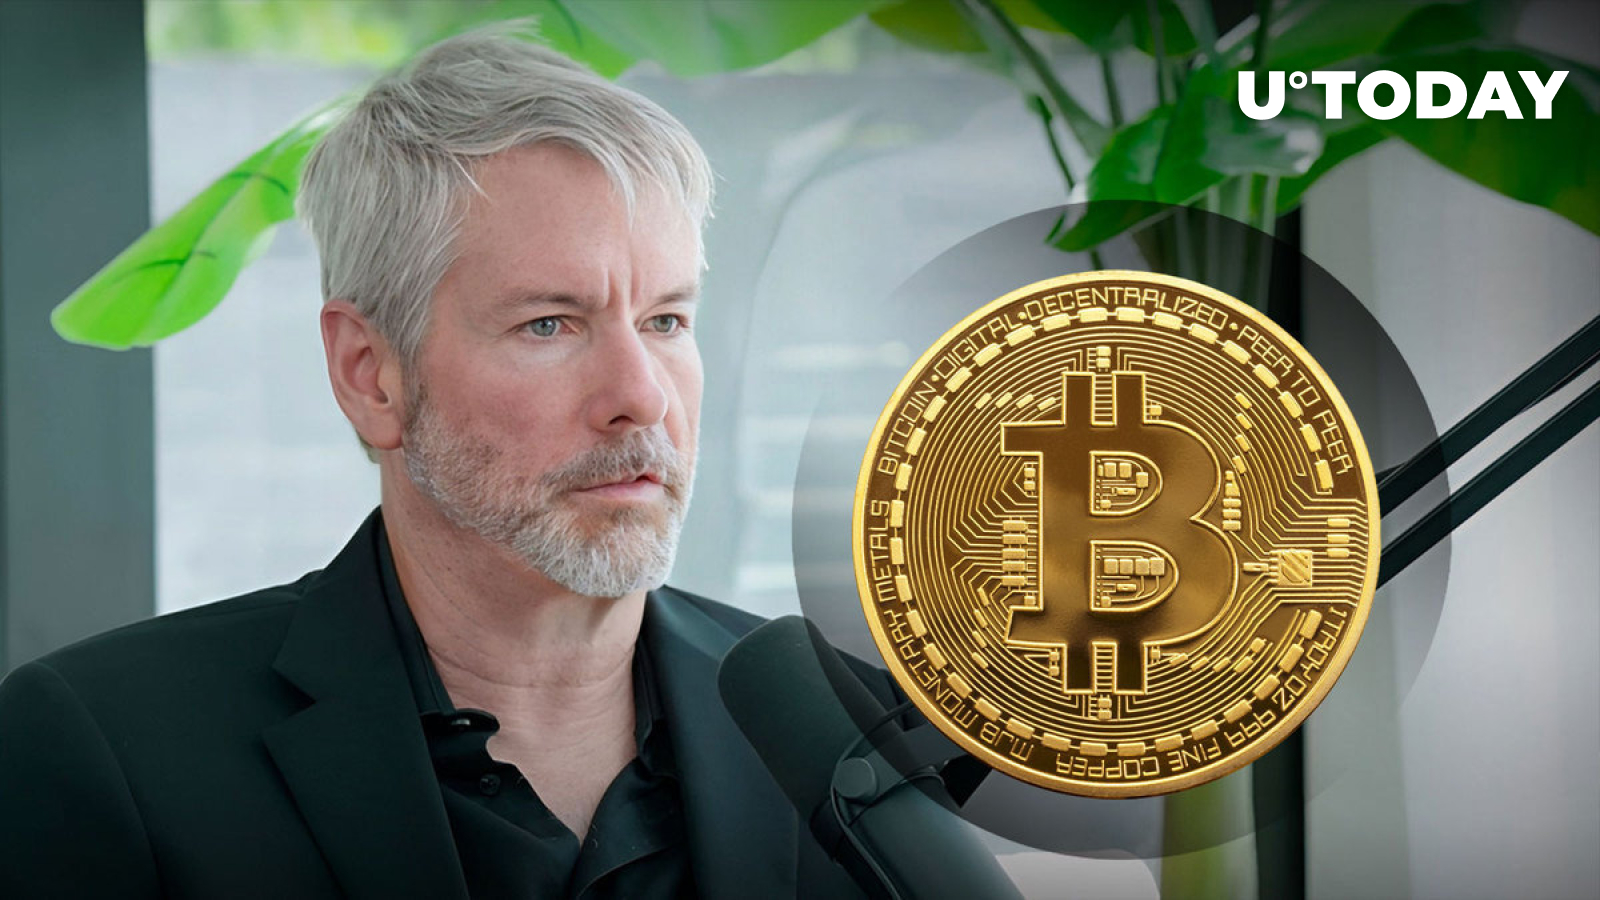 Bitcoin Is Better, Michael Saylor Says as Gold Hits New ATH